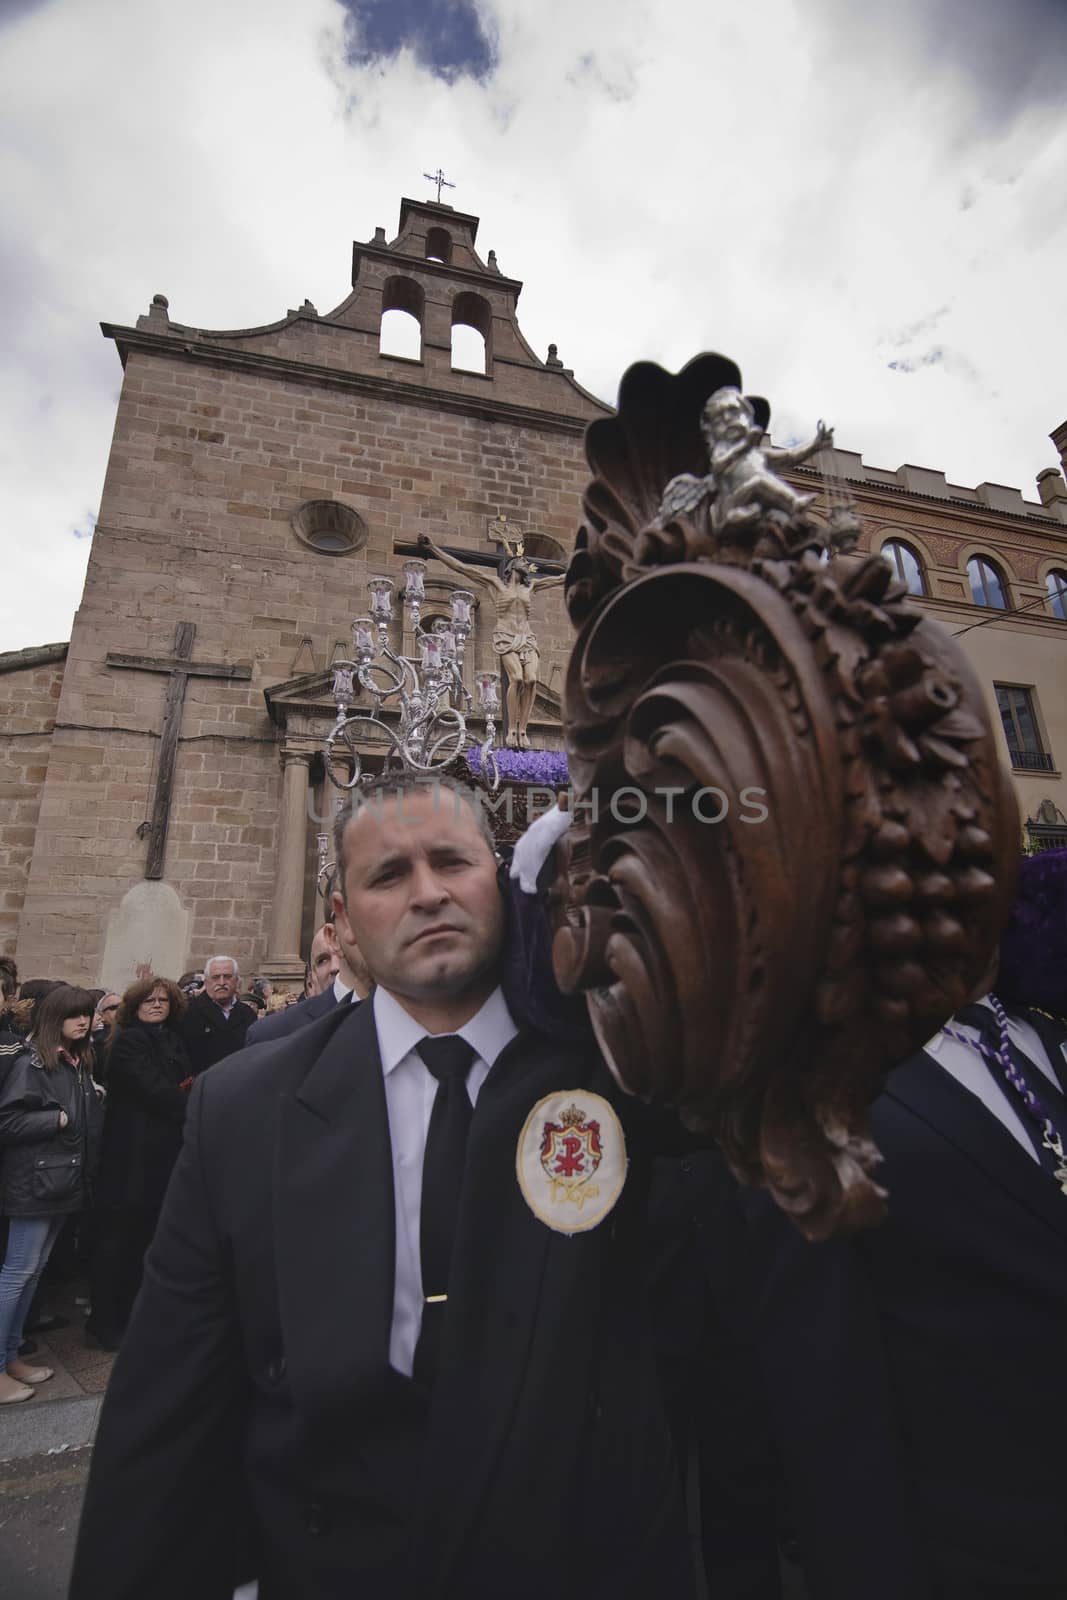 Leaving the Church of San Francisco of the brotherhood of the expiration of Christ ported by men with blue suit, Holy week in Linares, province Jaen, Andalusia, Spain